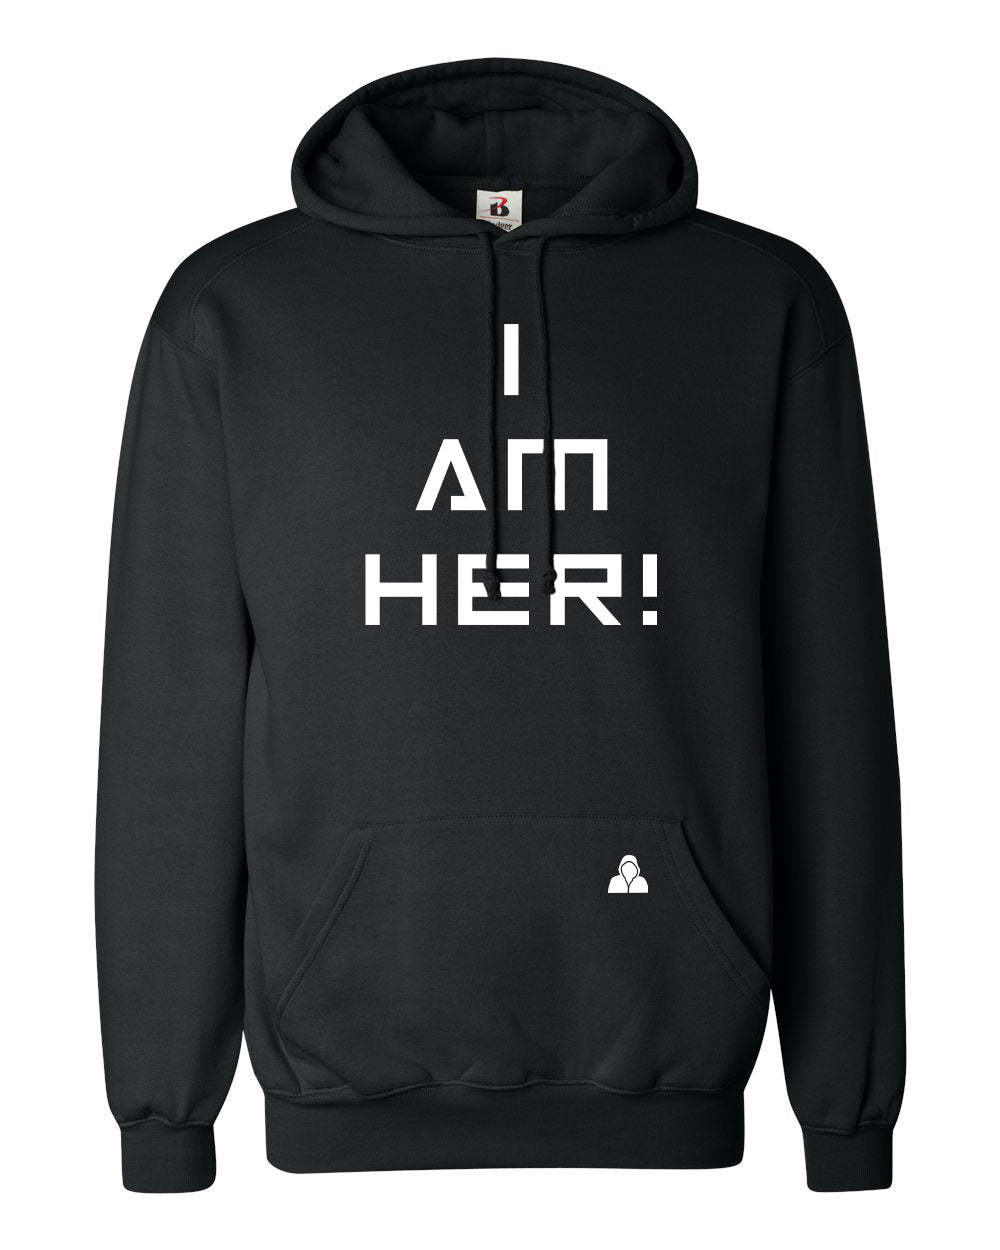 I AM HER! Adult Hoodie (color options available)